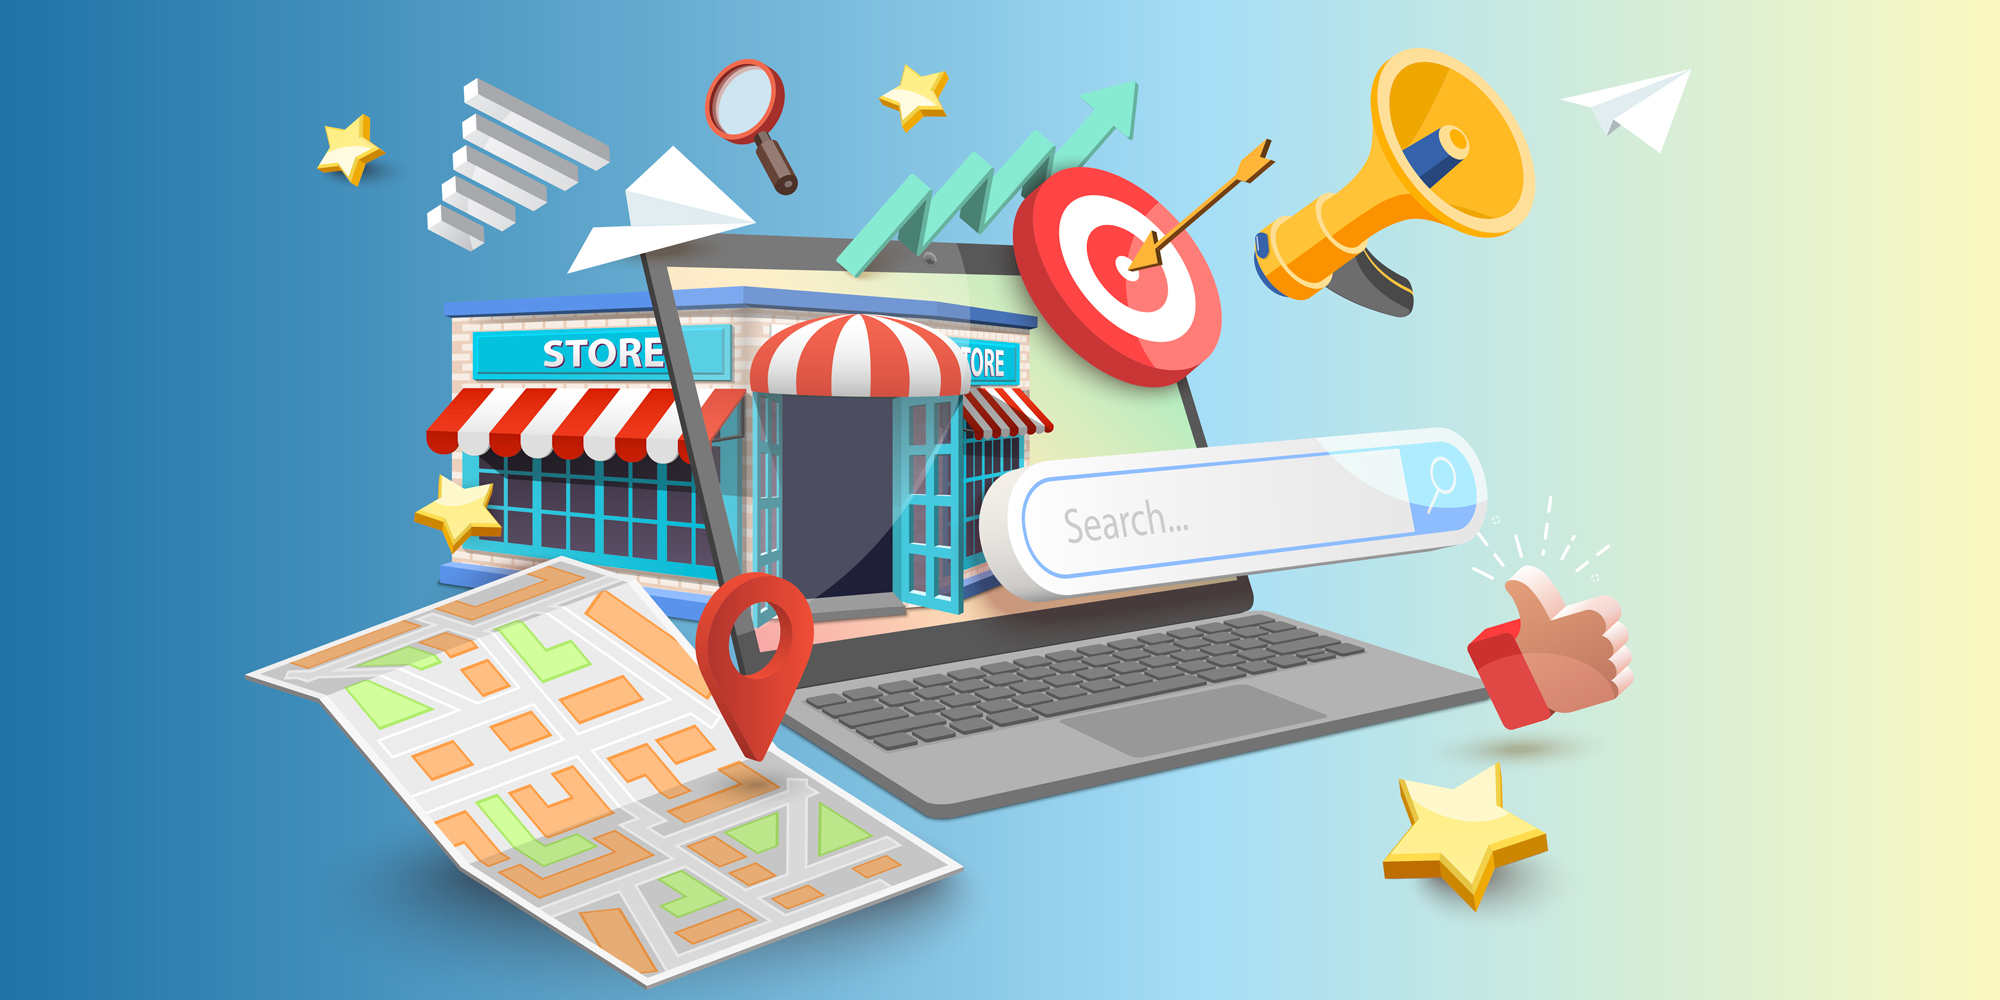 Illustration of store front with search bar, magnifying glass, stars, targets and a map surrounding a laptop displaying the store.